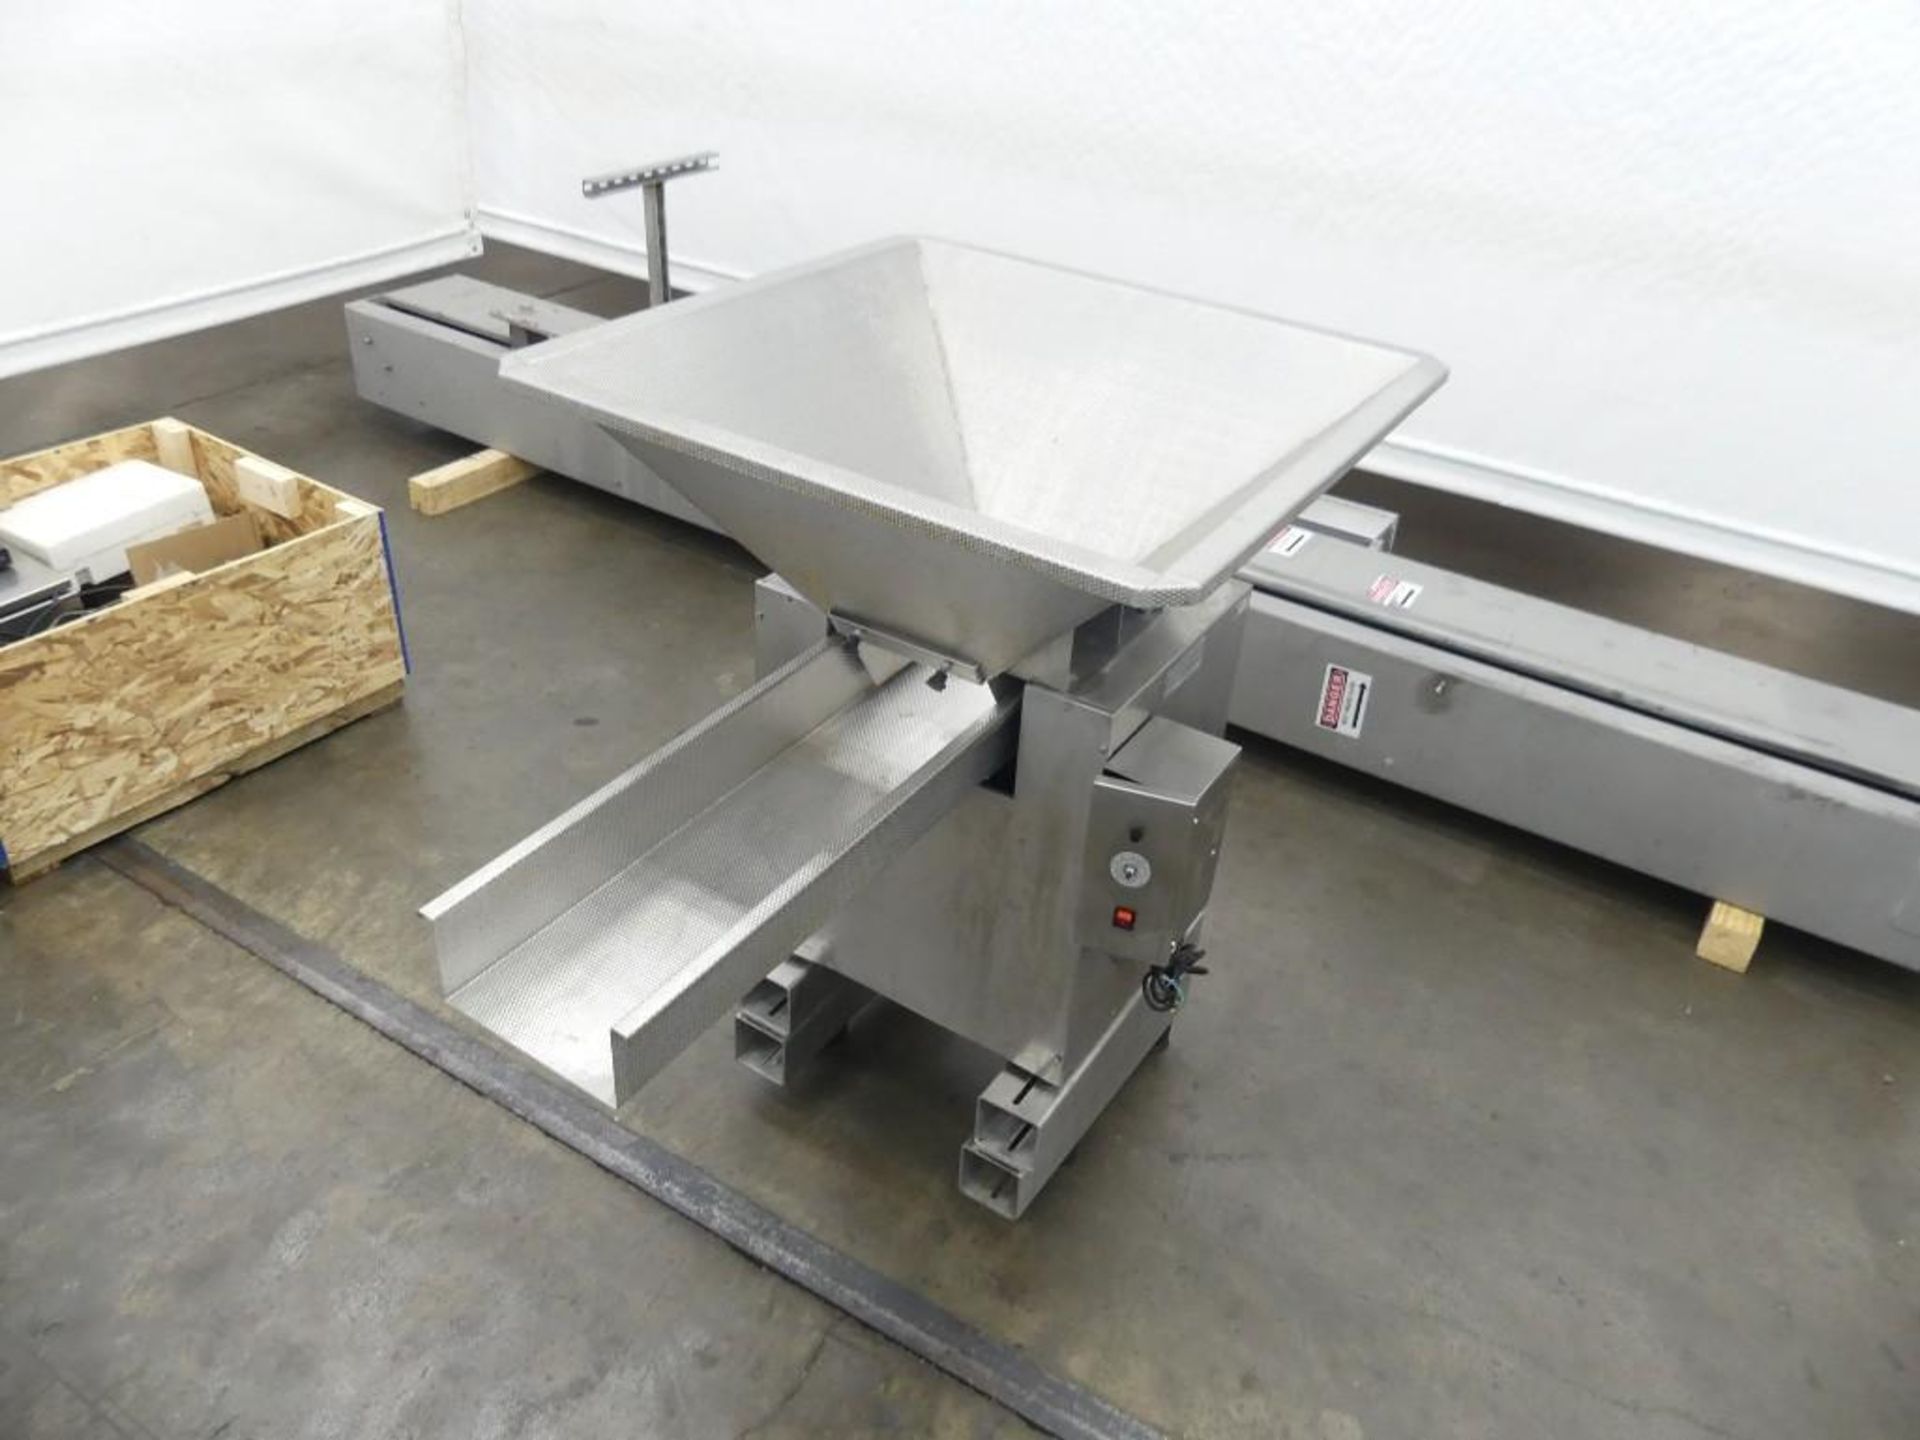 Massman HFFS-IM1000 Flexible Pouch Packaging System - Image 65 of 127